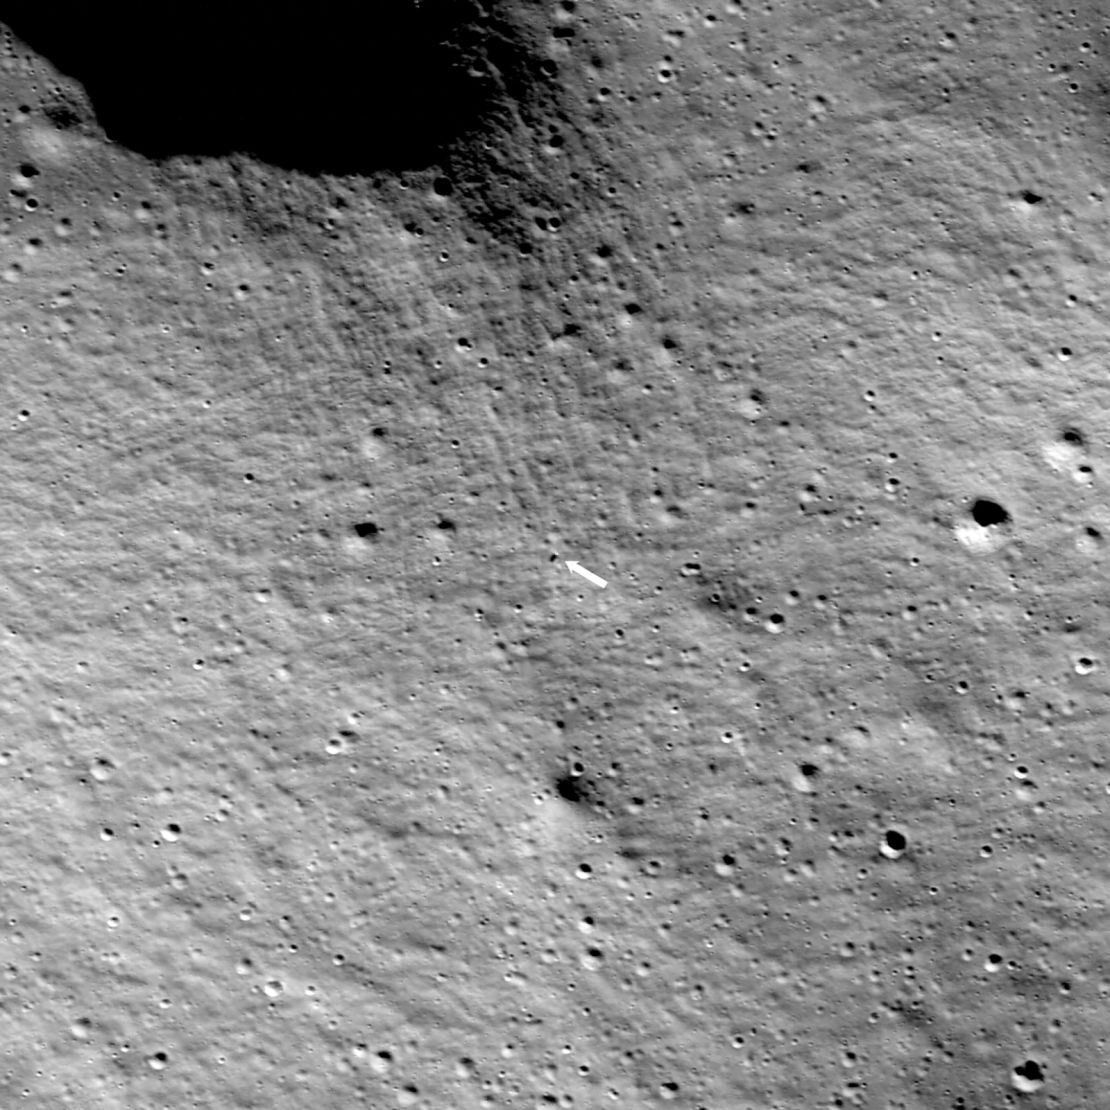 NASA's Lunar Reconnaissance Orbiter captured this image of the Intuitive Machines Nova-C lander, also called Odysseus, Odie or IM-1, on the moon's surface on February 24 at 1:57 p.m. ET.